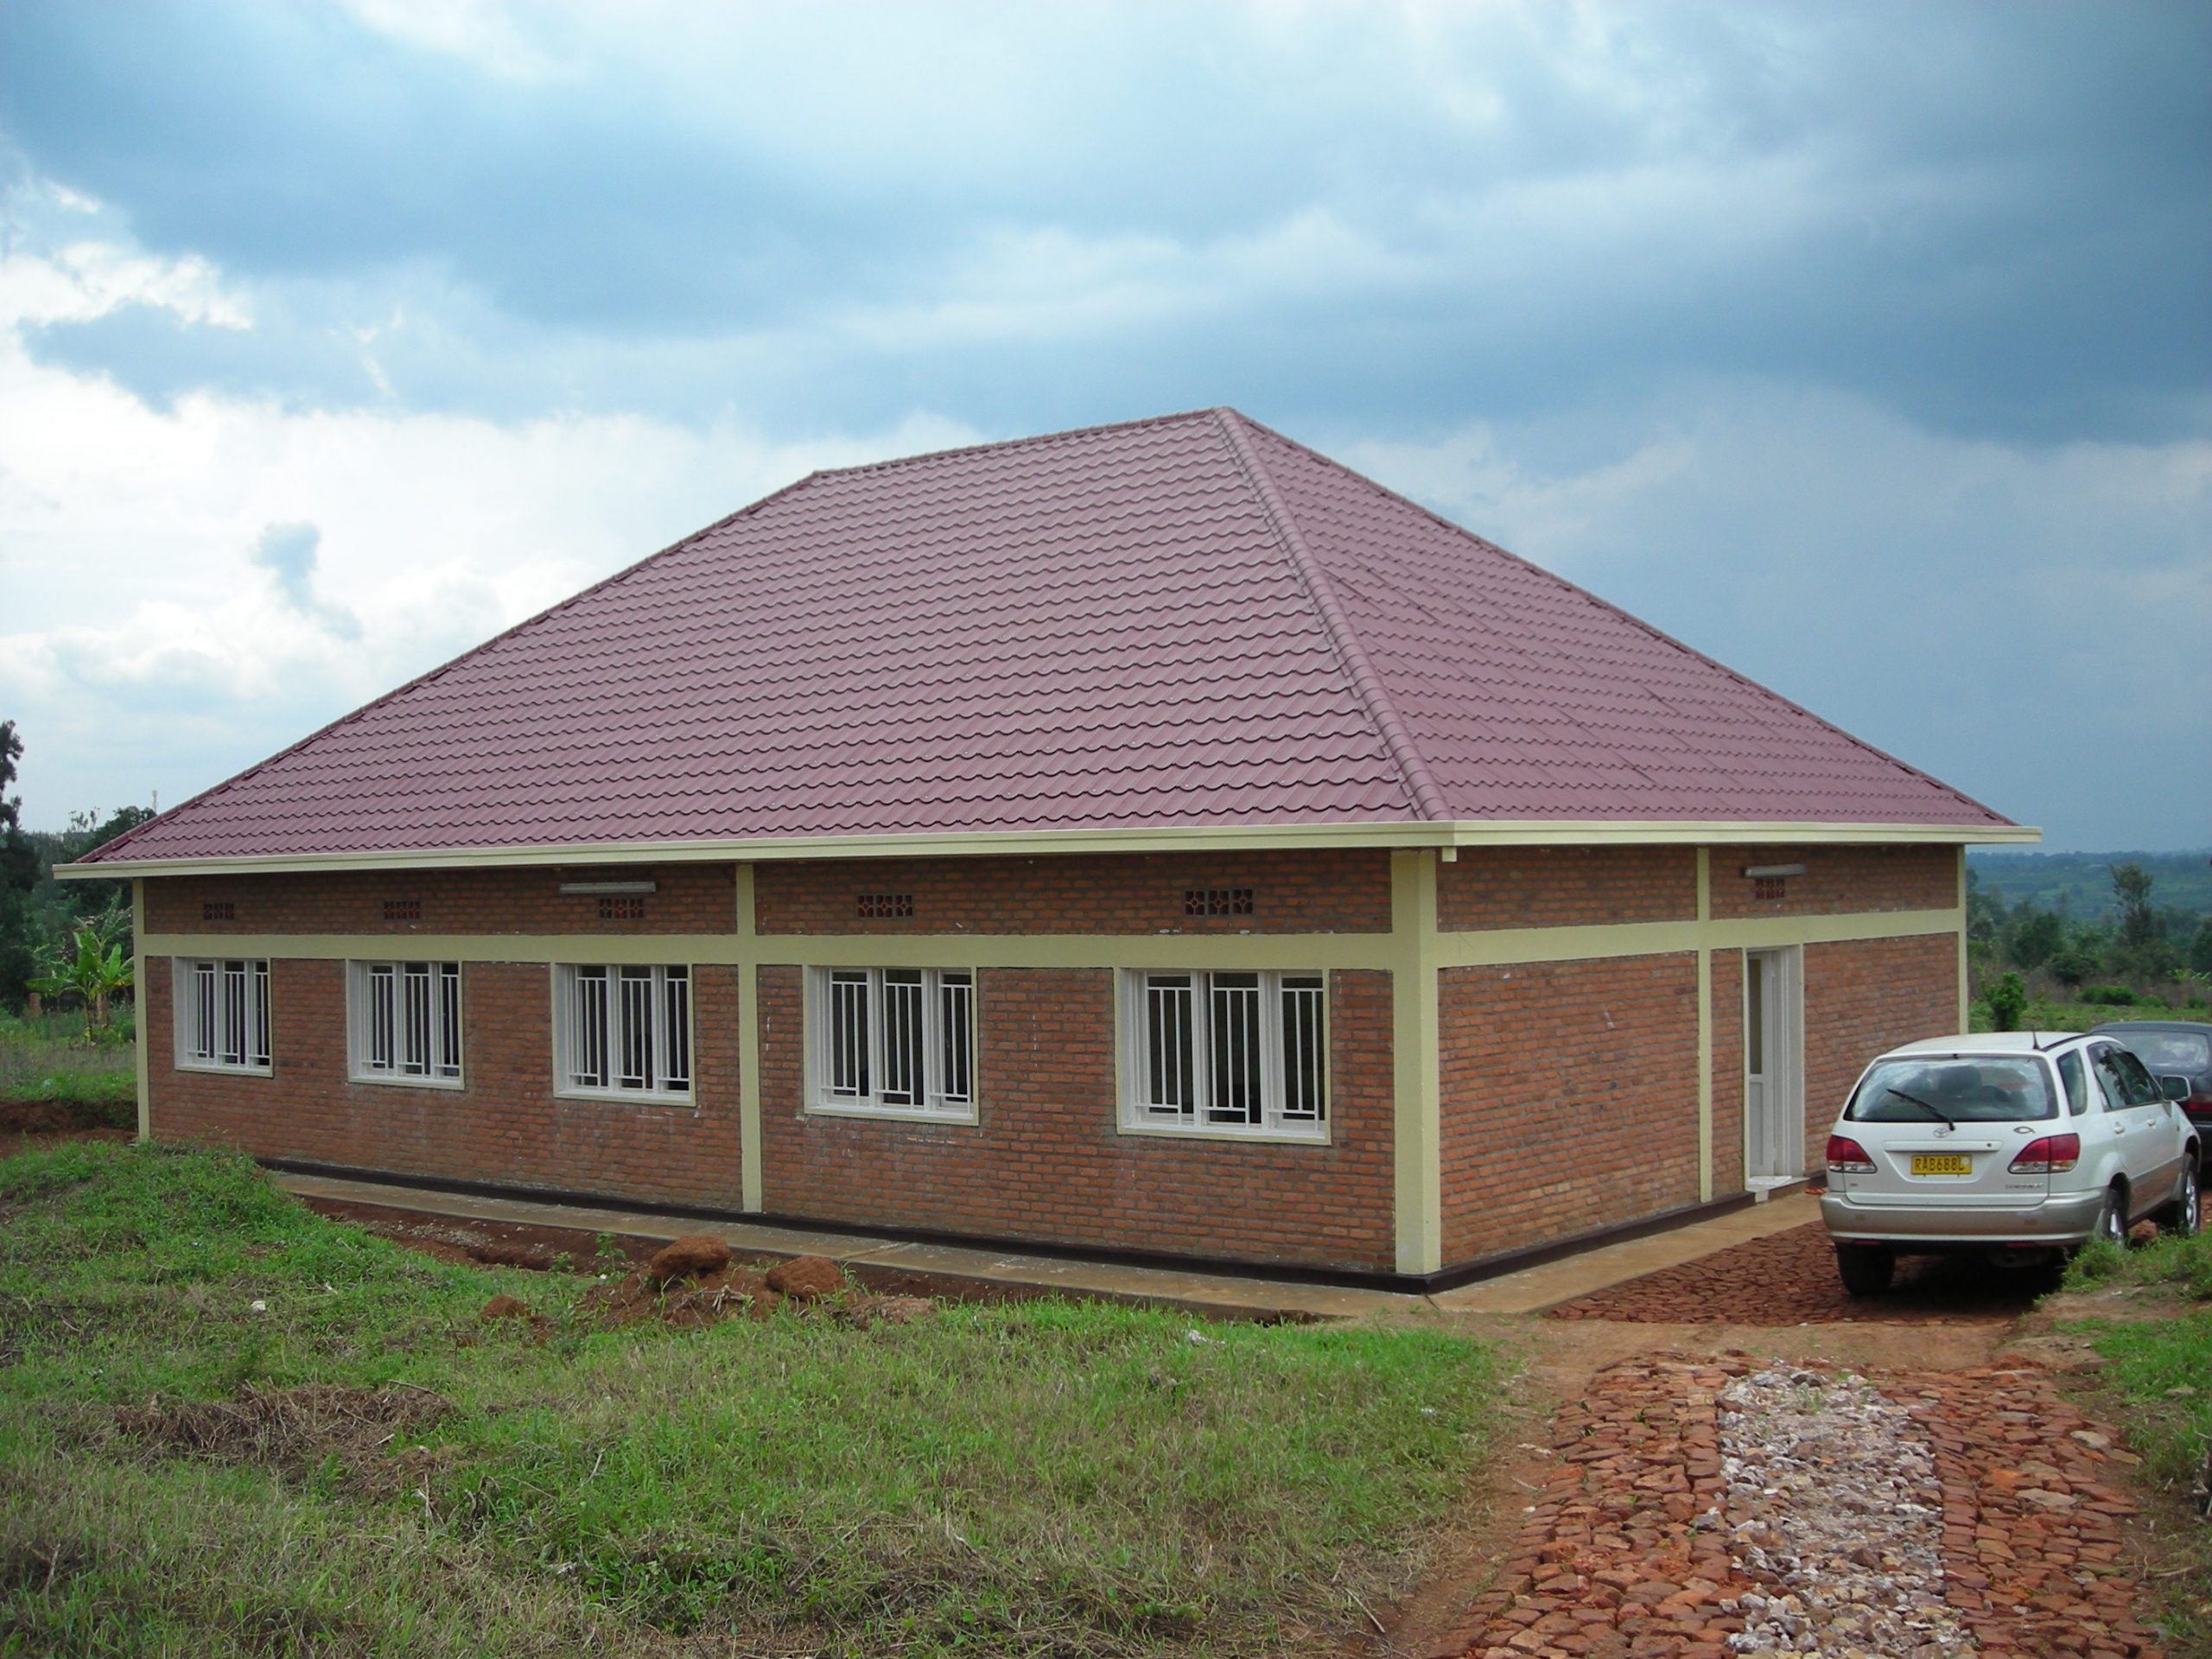 New Faith Victory Association office at the Rusororo site.